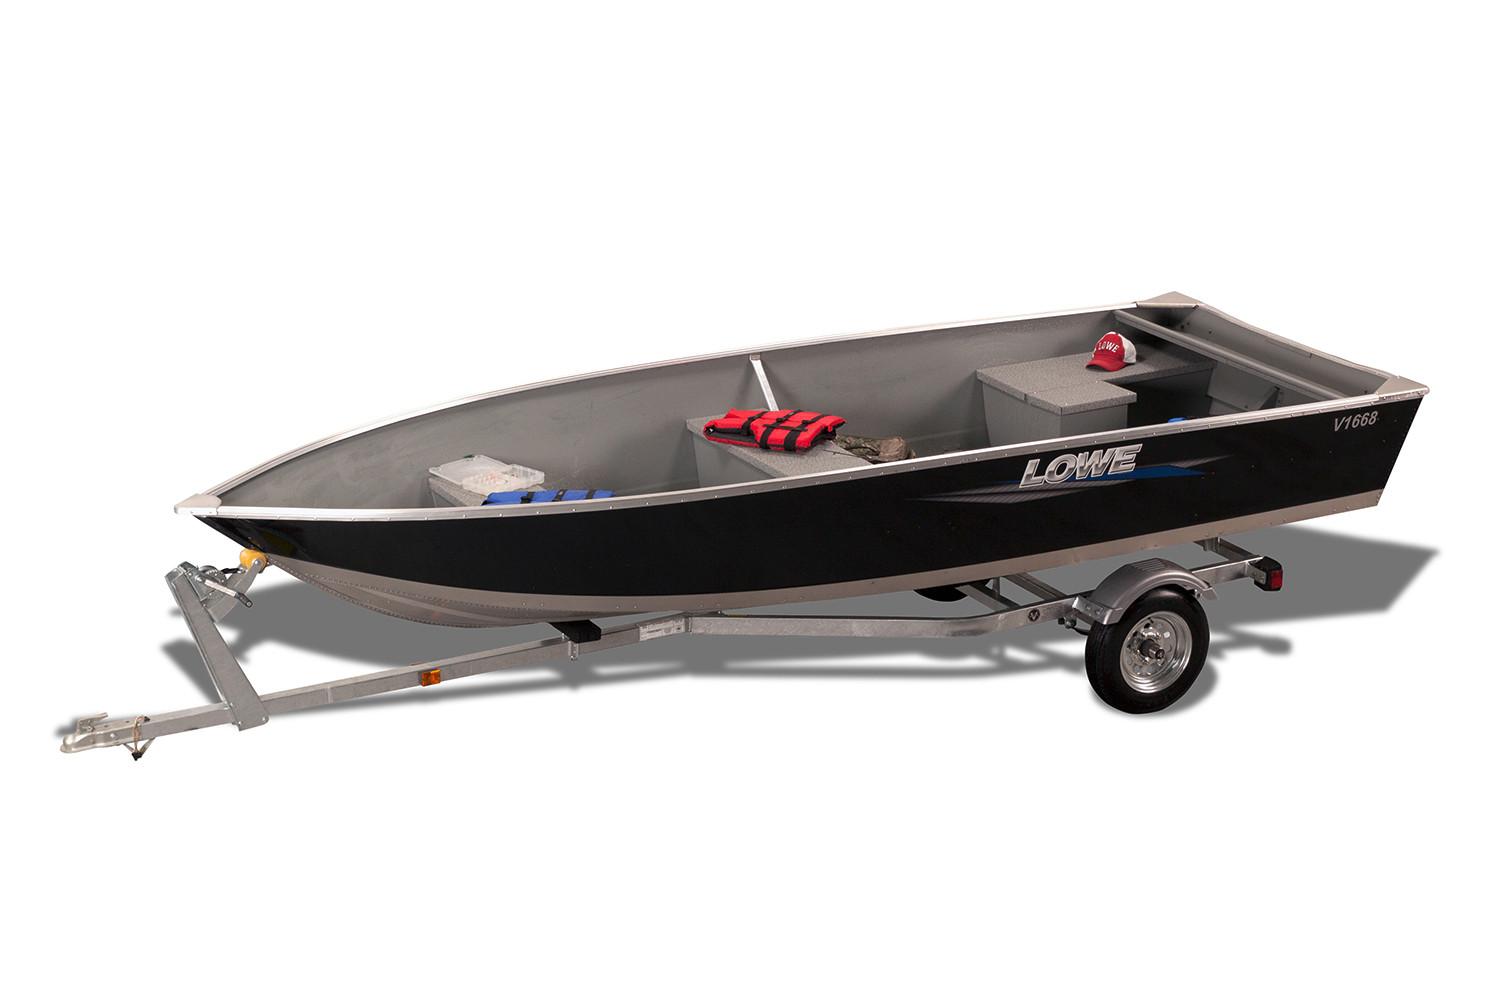 New 2018 Lowe V1668 Utility V Power Boats Outboard in ...